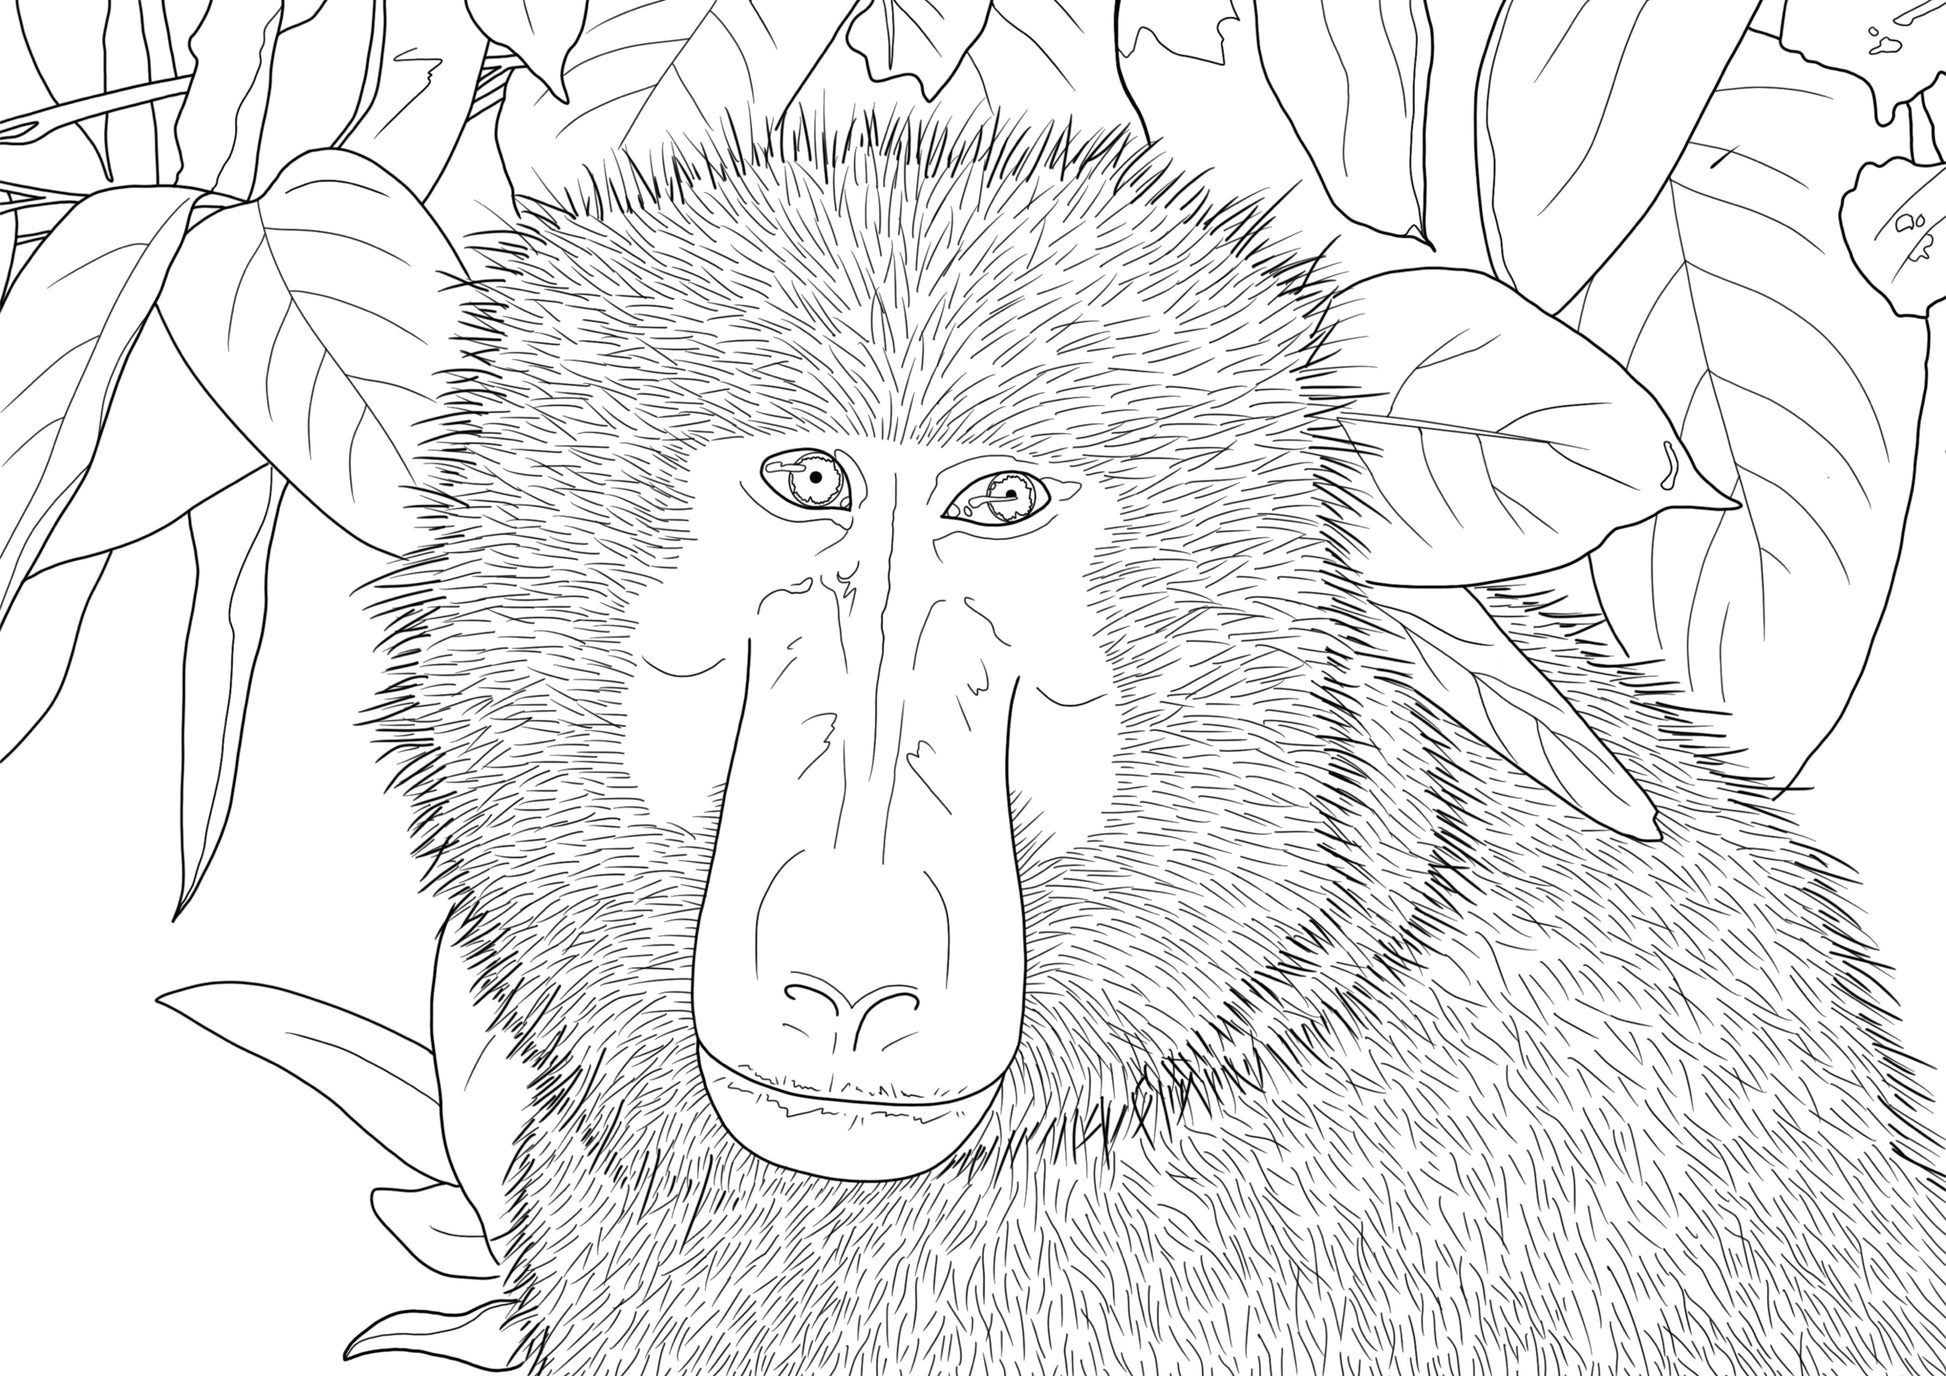 Line drawing of the long face of a baboon peering out from tropical foliage. 